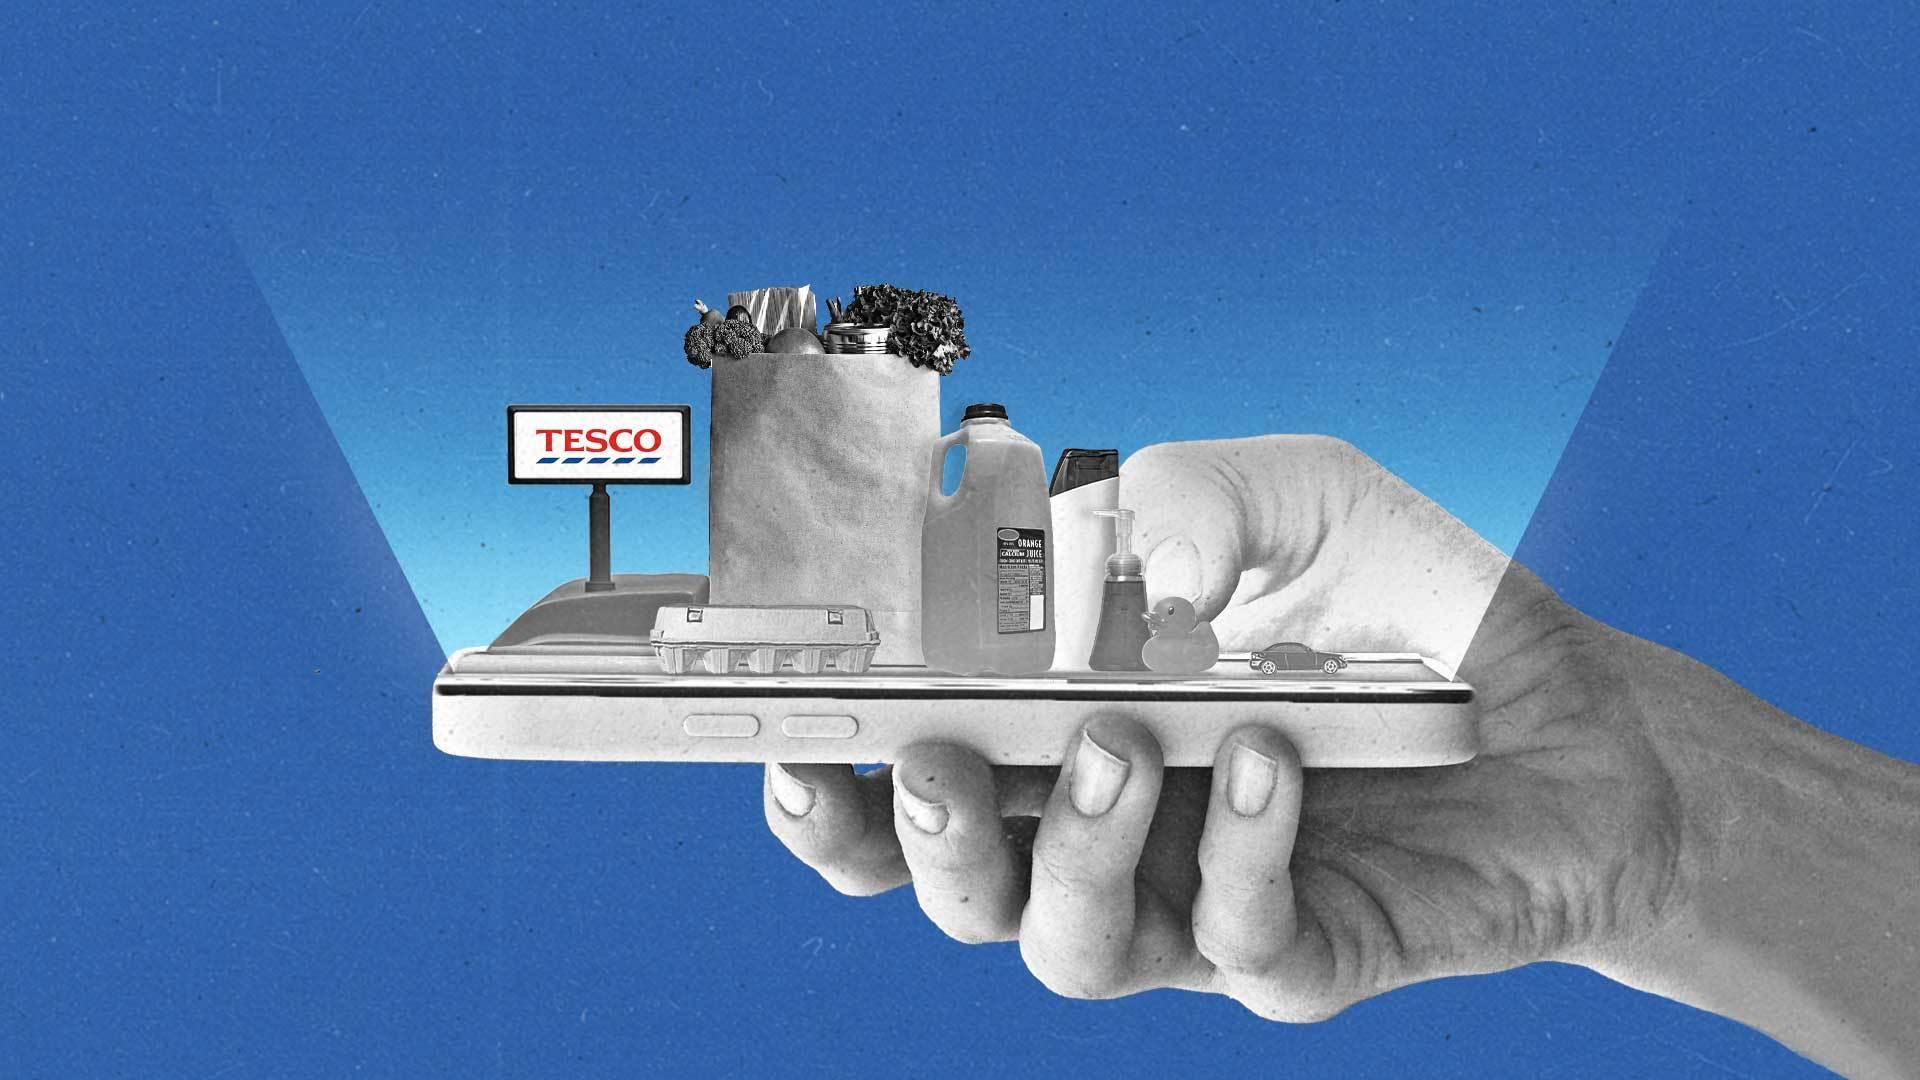 A hand holds a smartphone that features a checkout counter containing various items, including eggs, a shopping bag with groceries, a jug of orange juice, lotion, soap, a rubber duck and a toy car. A register at the end of the smartphone features a display showing the Tesco logo.